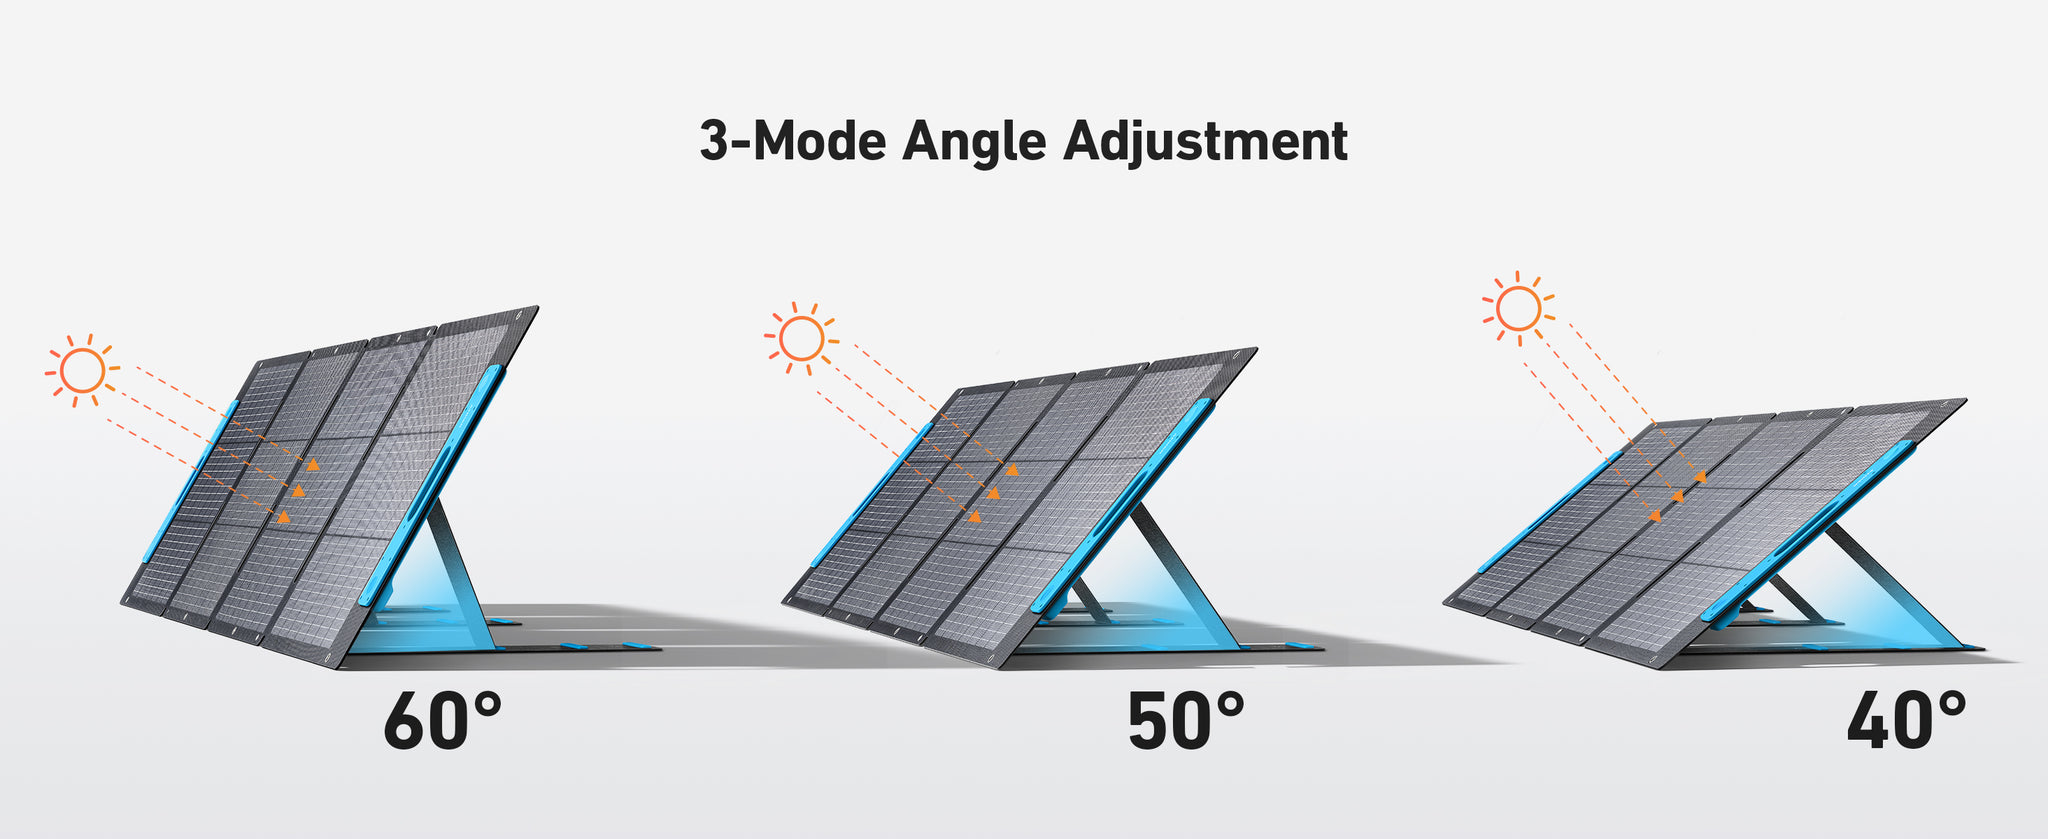 Anker 531 Solar Panel 200W No US Sales Tax, Free US Shipping